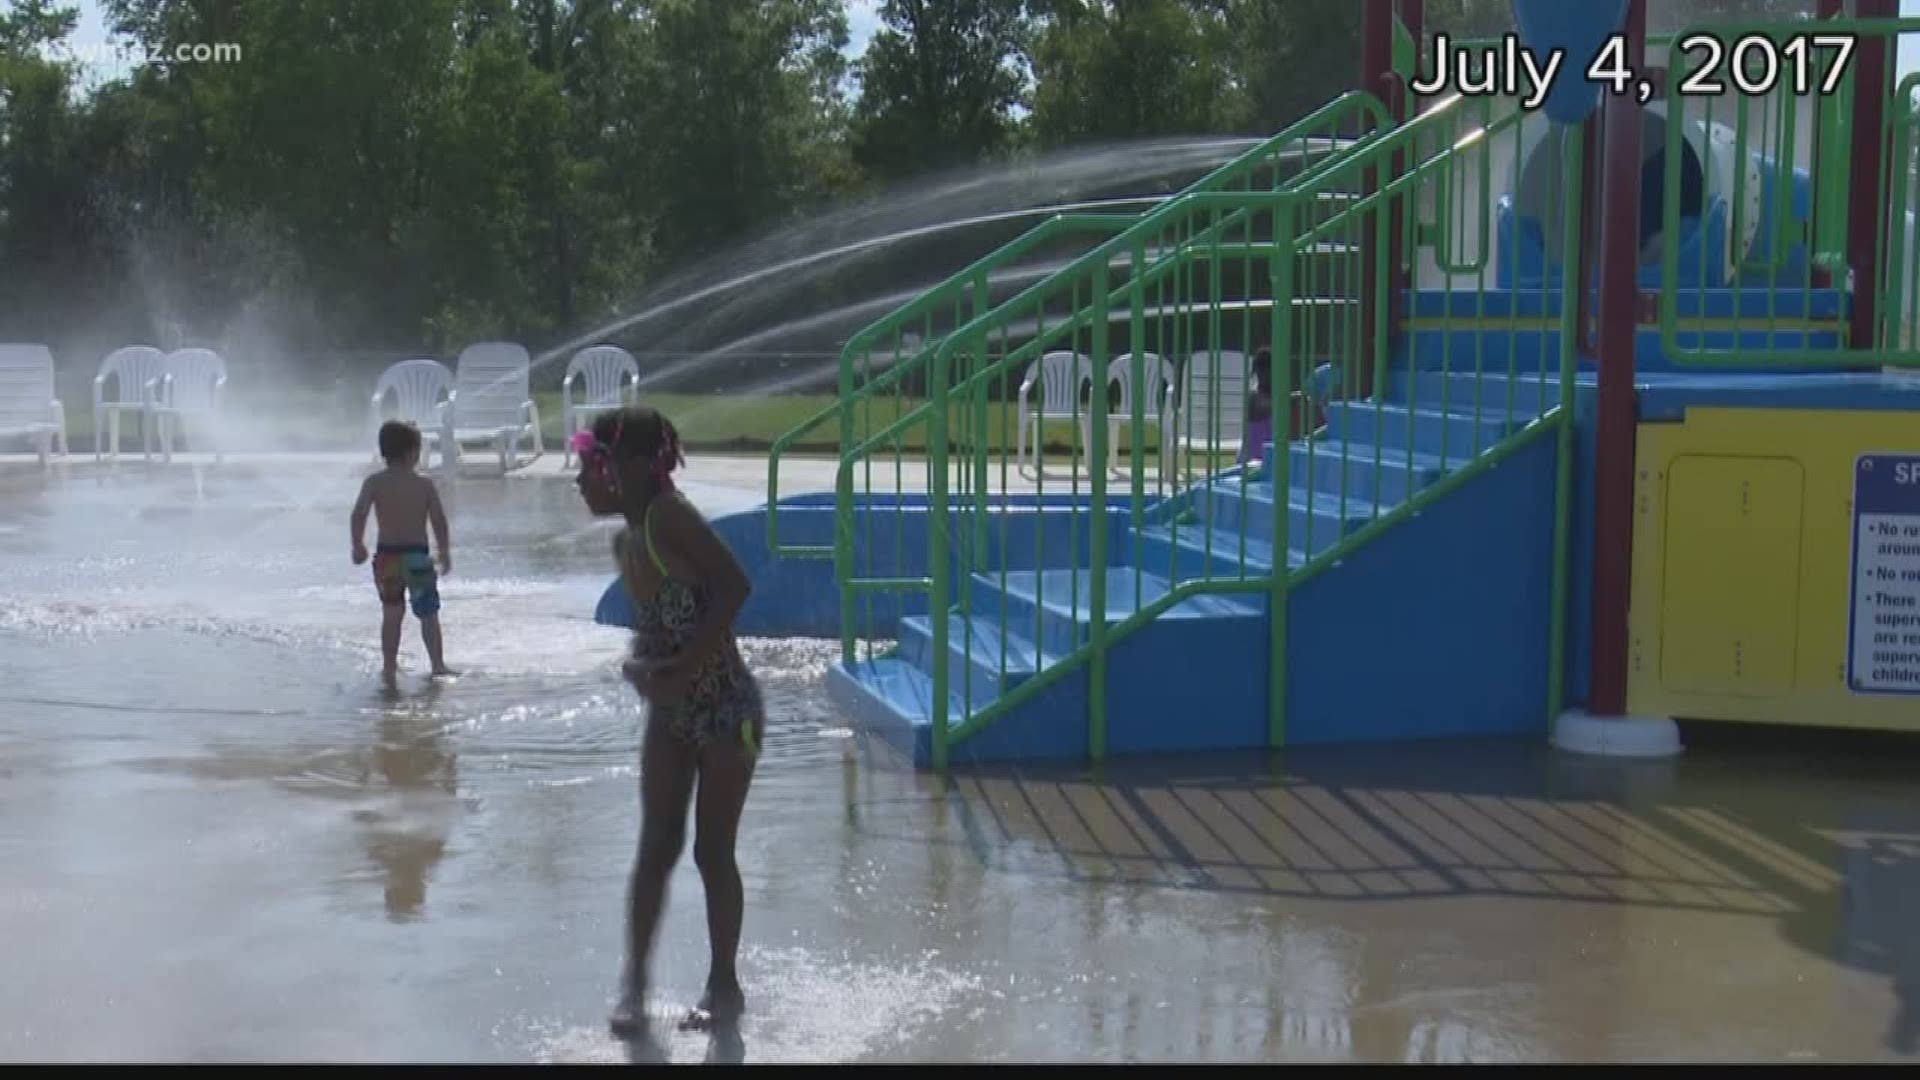 New managers behind Sandy Beach Water Park